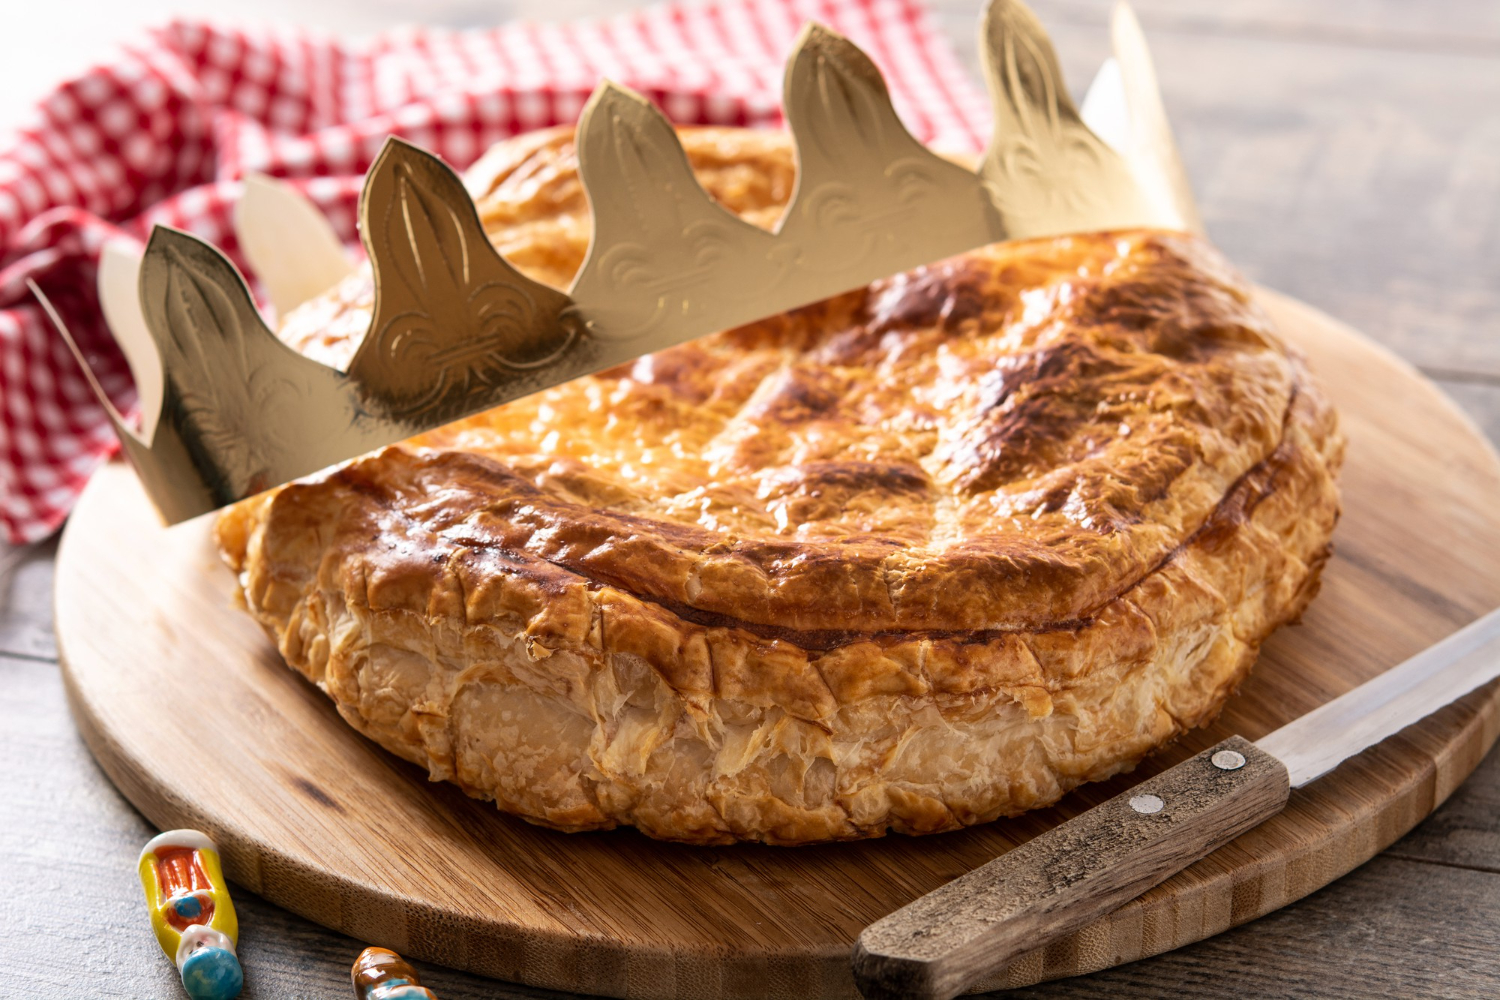 galette des rois wooden table traditional epiphany cake france